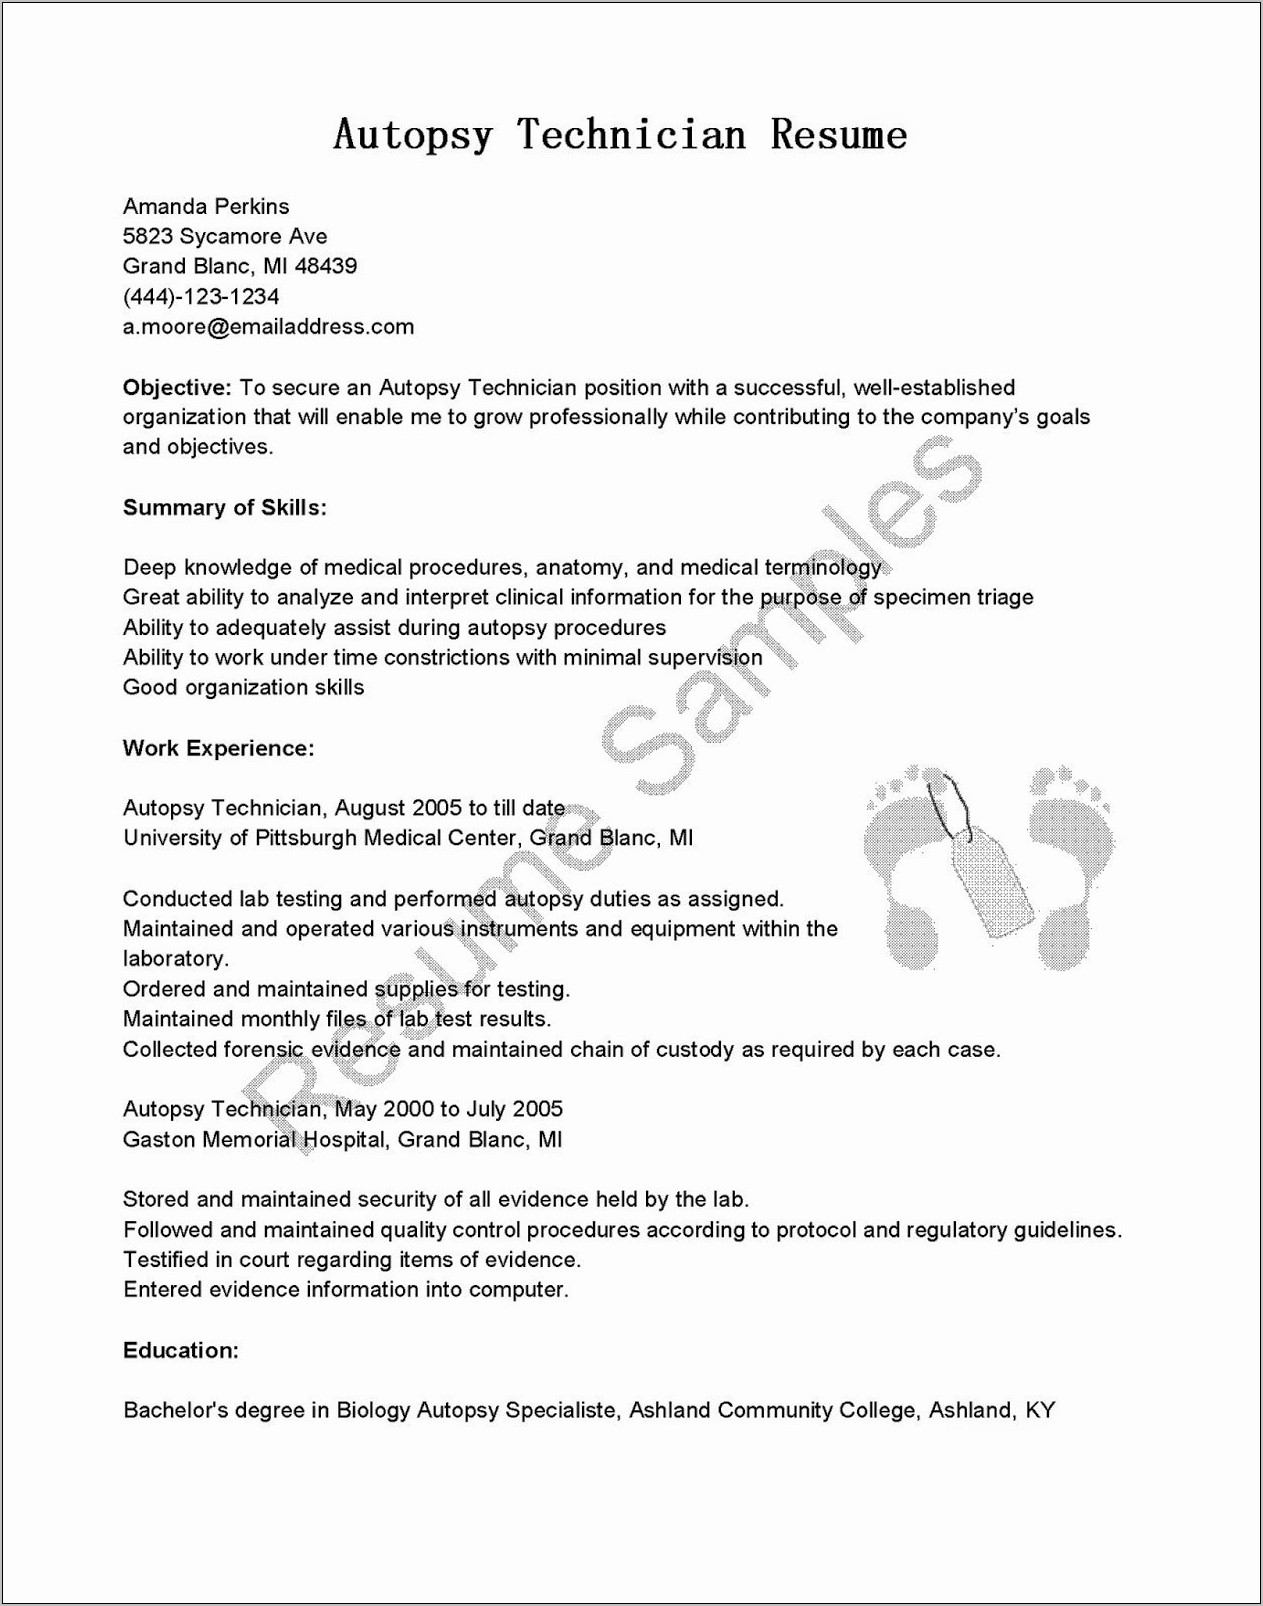 Resume Examples For Medical Assistant Jobs